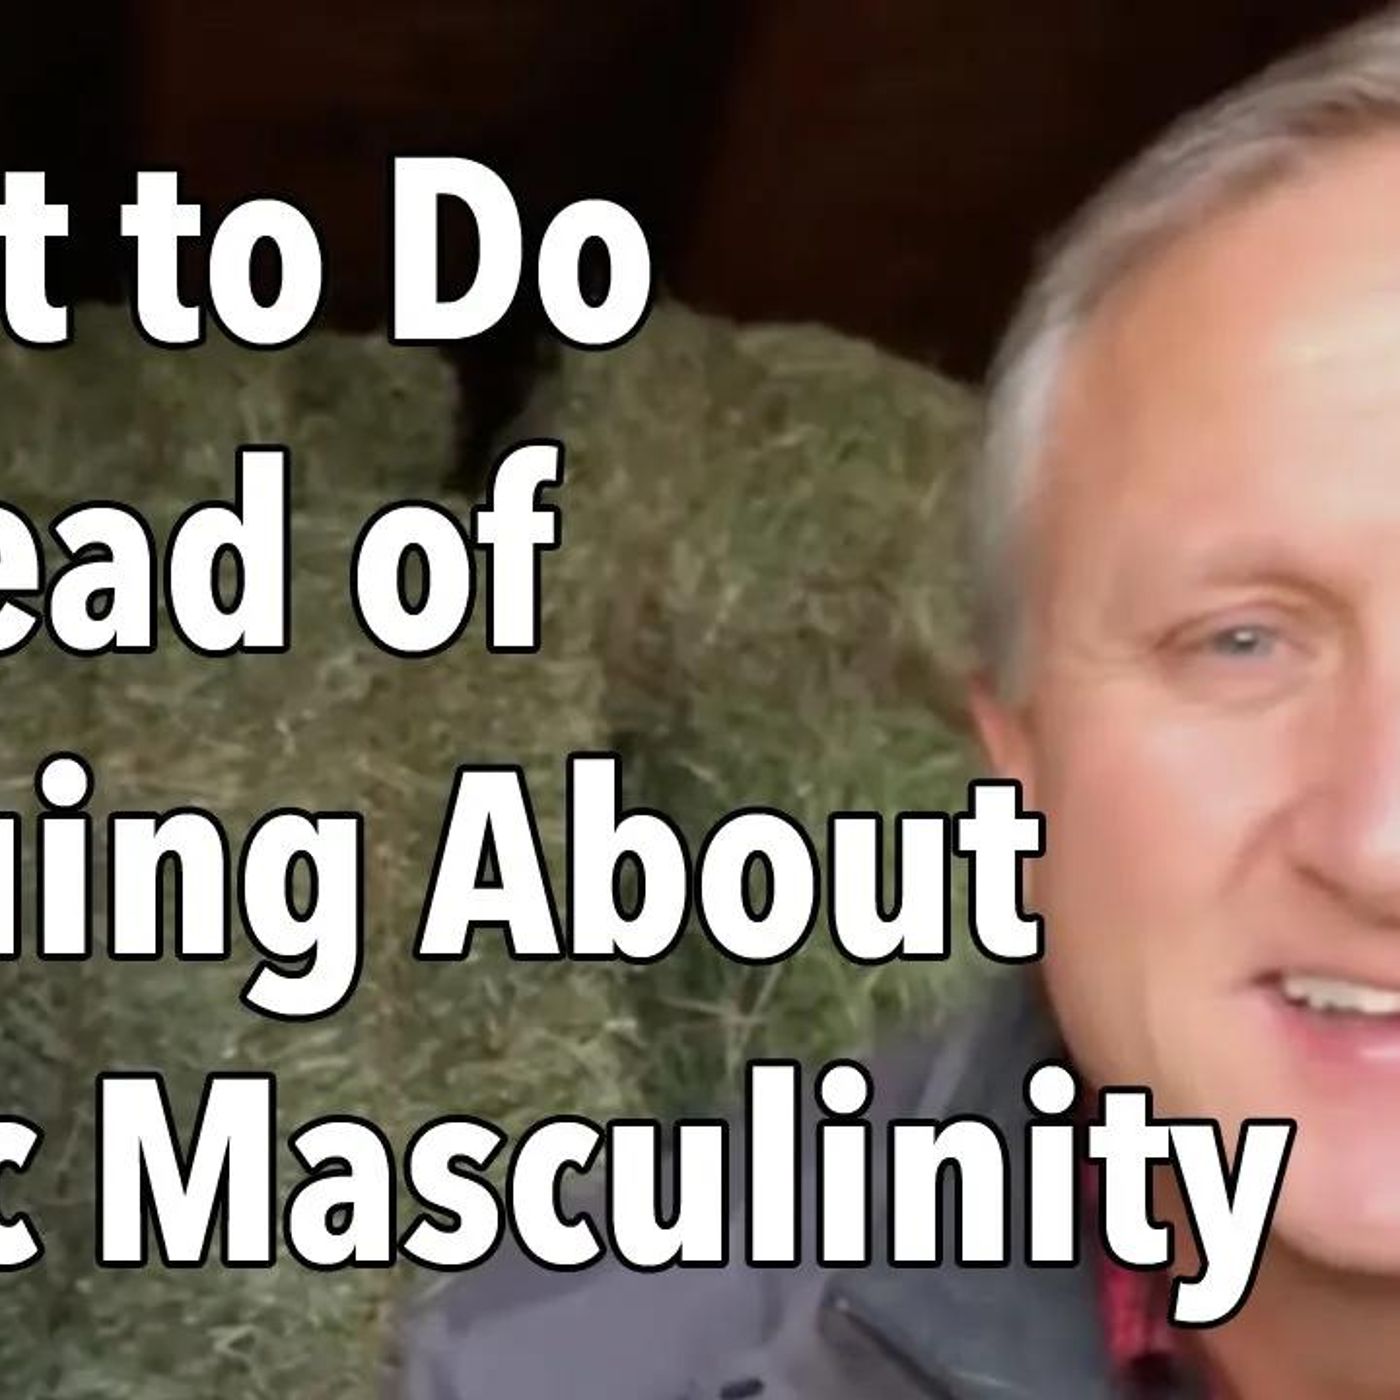 What to Do Instead of Arguing About Toxic Masculinity